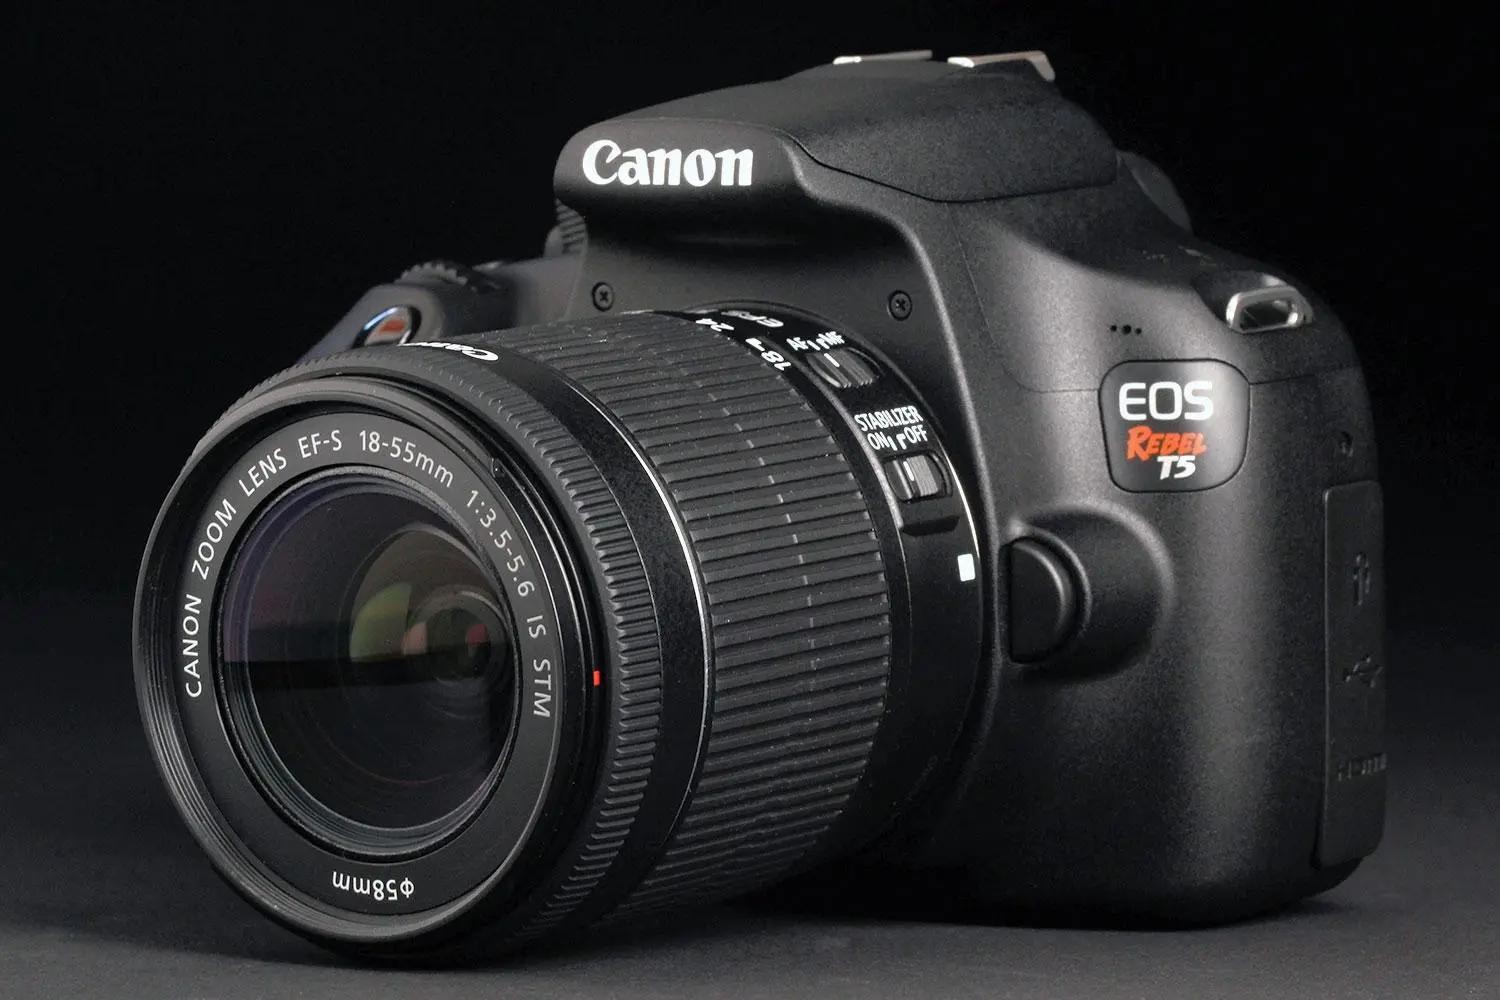 How To Operate A Canon T5 DSLR Camera